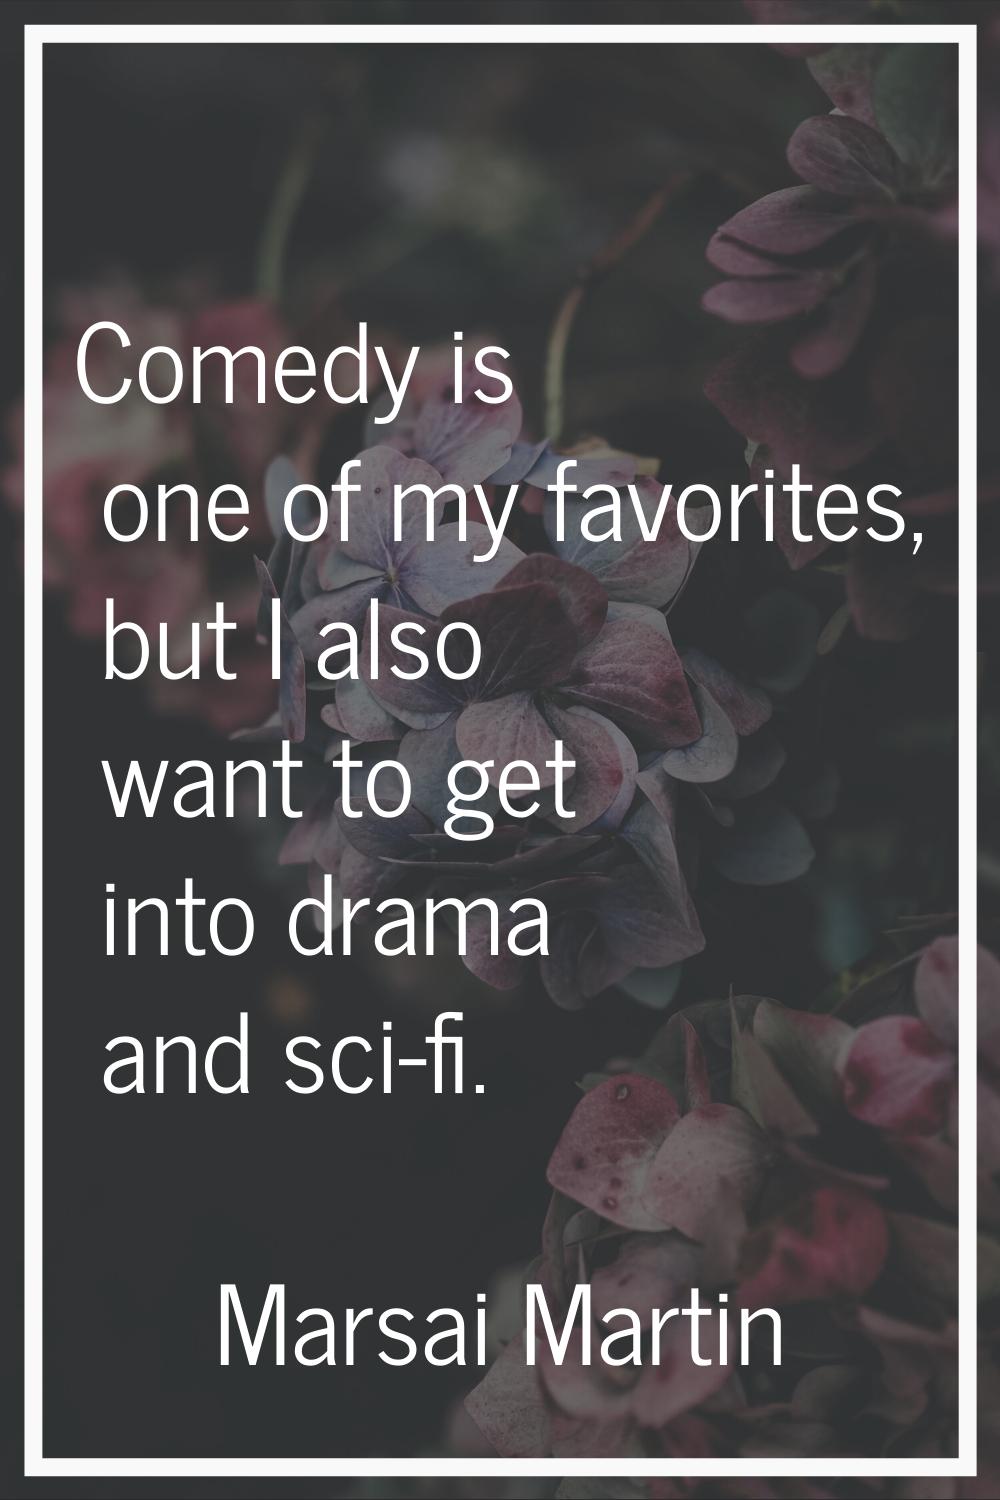 Comedy is one of my favorites, but I also want to get into drama and sci-fi.